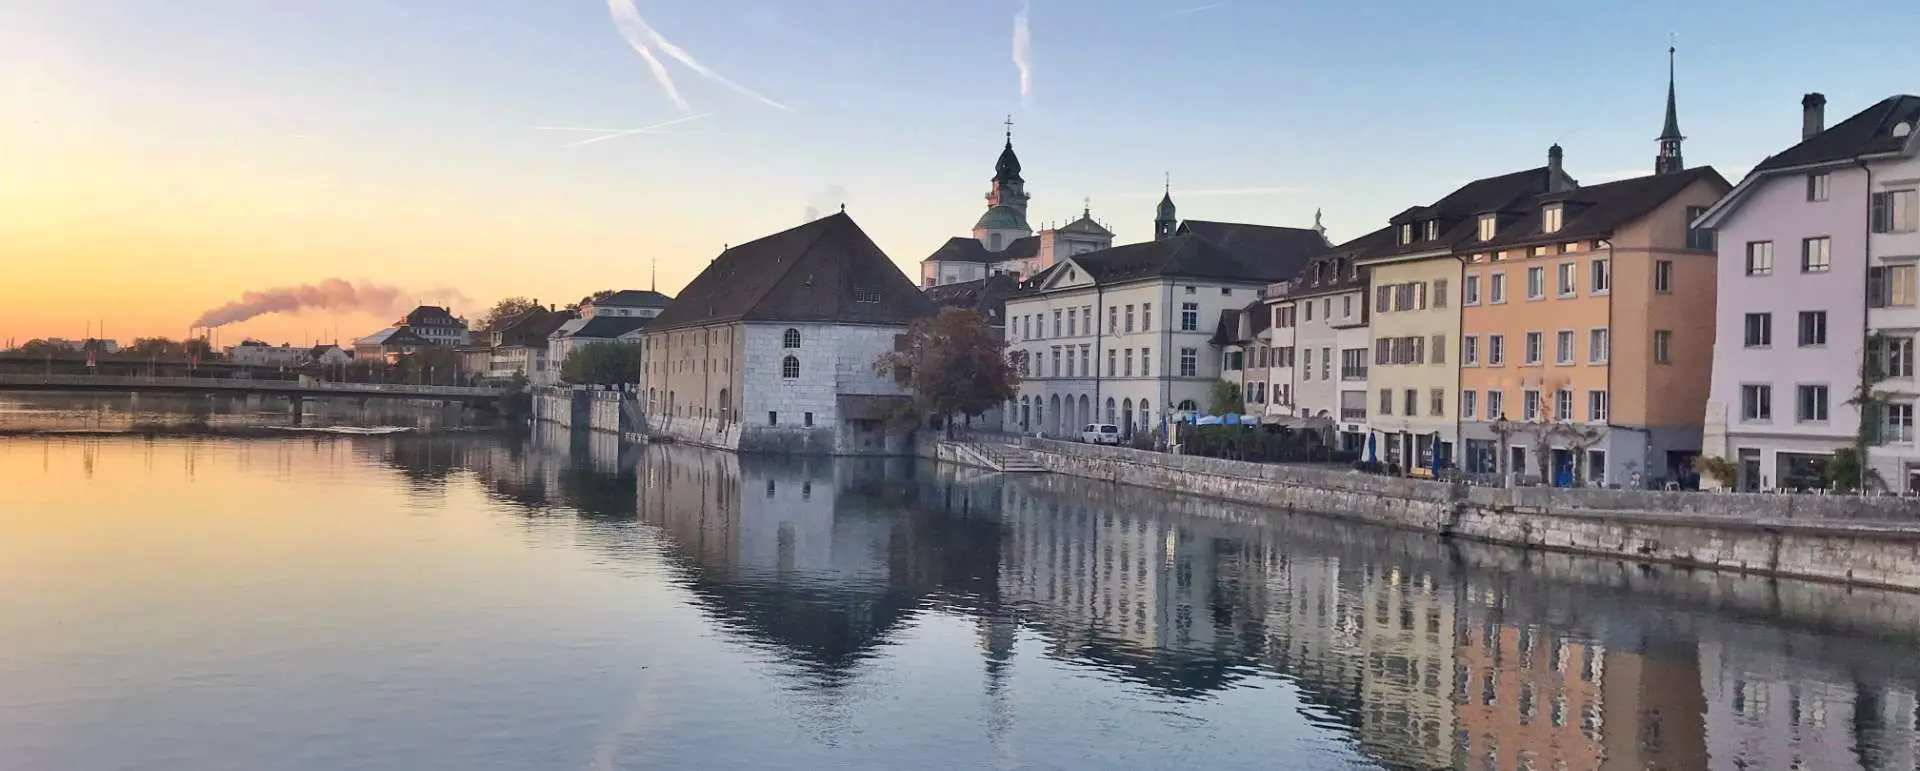 Solothurn - Exclusive locations for corporate retreats